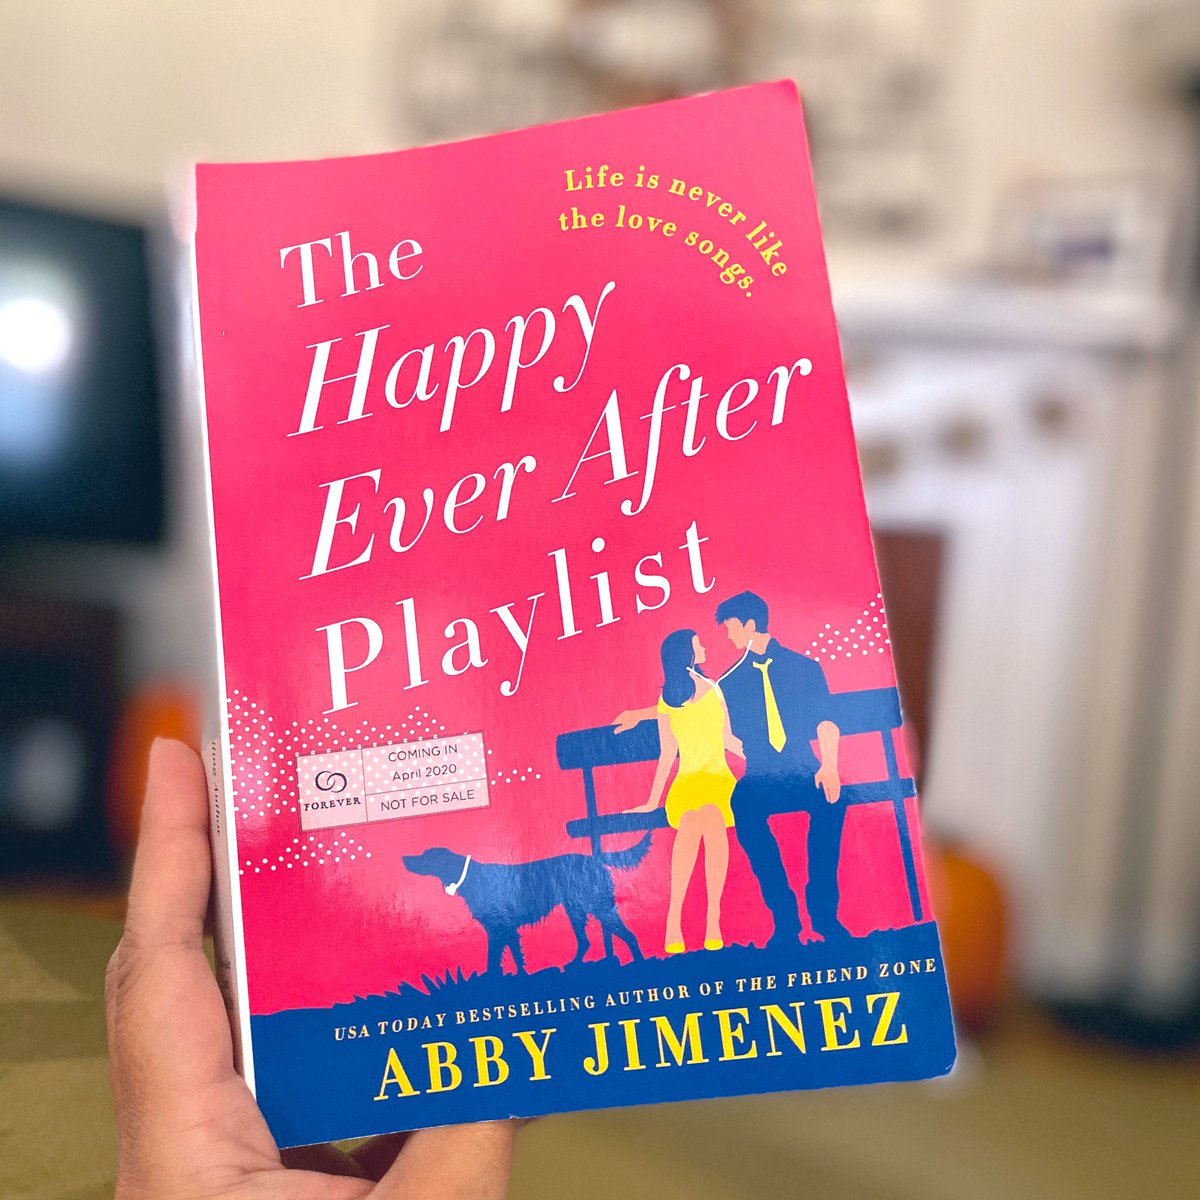 Download e-book The happy ever after playlist cover For Free